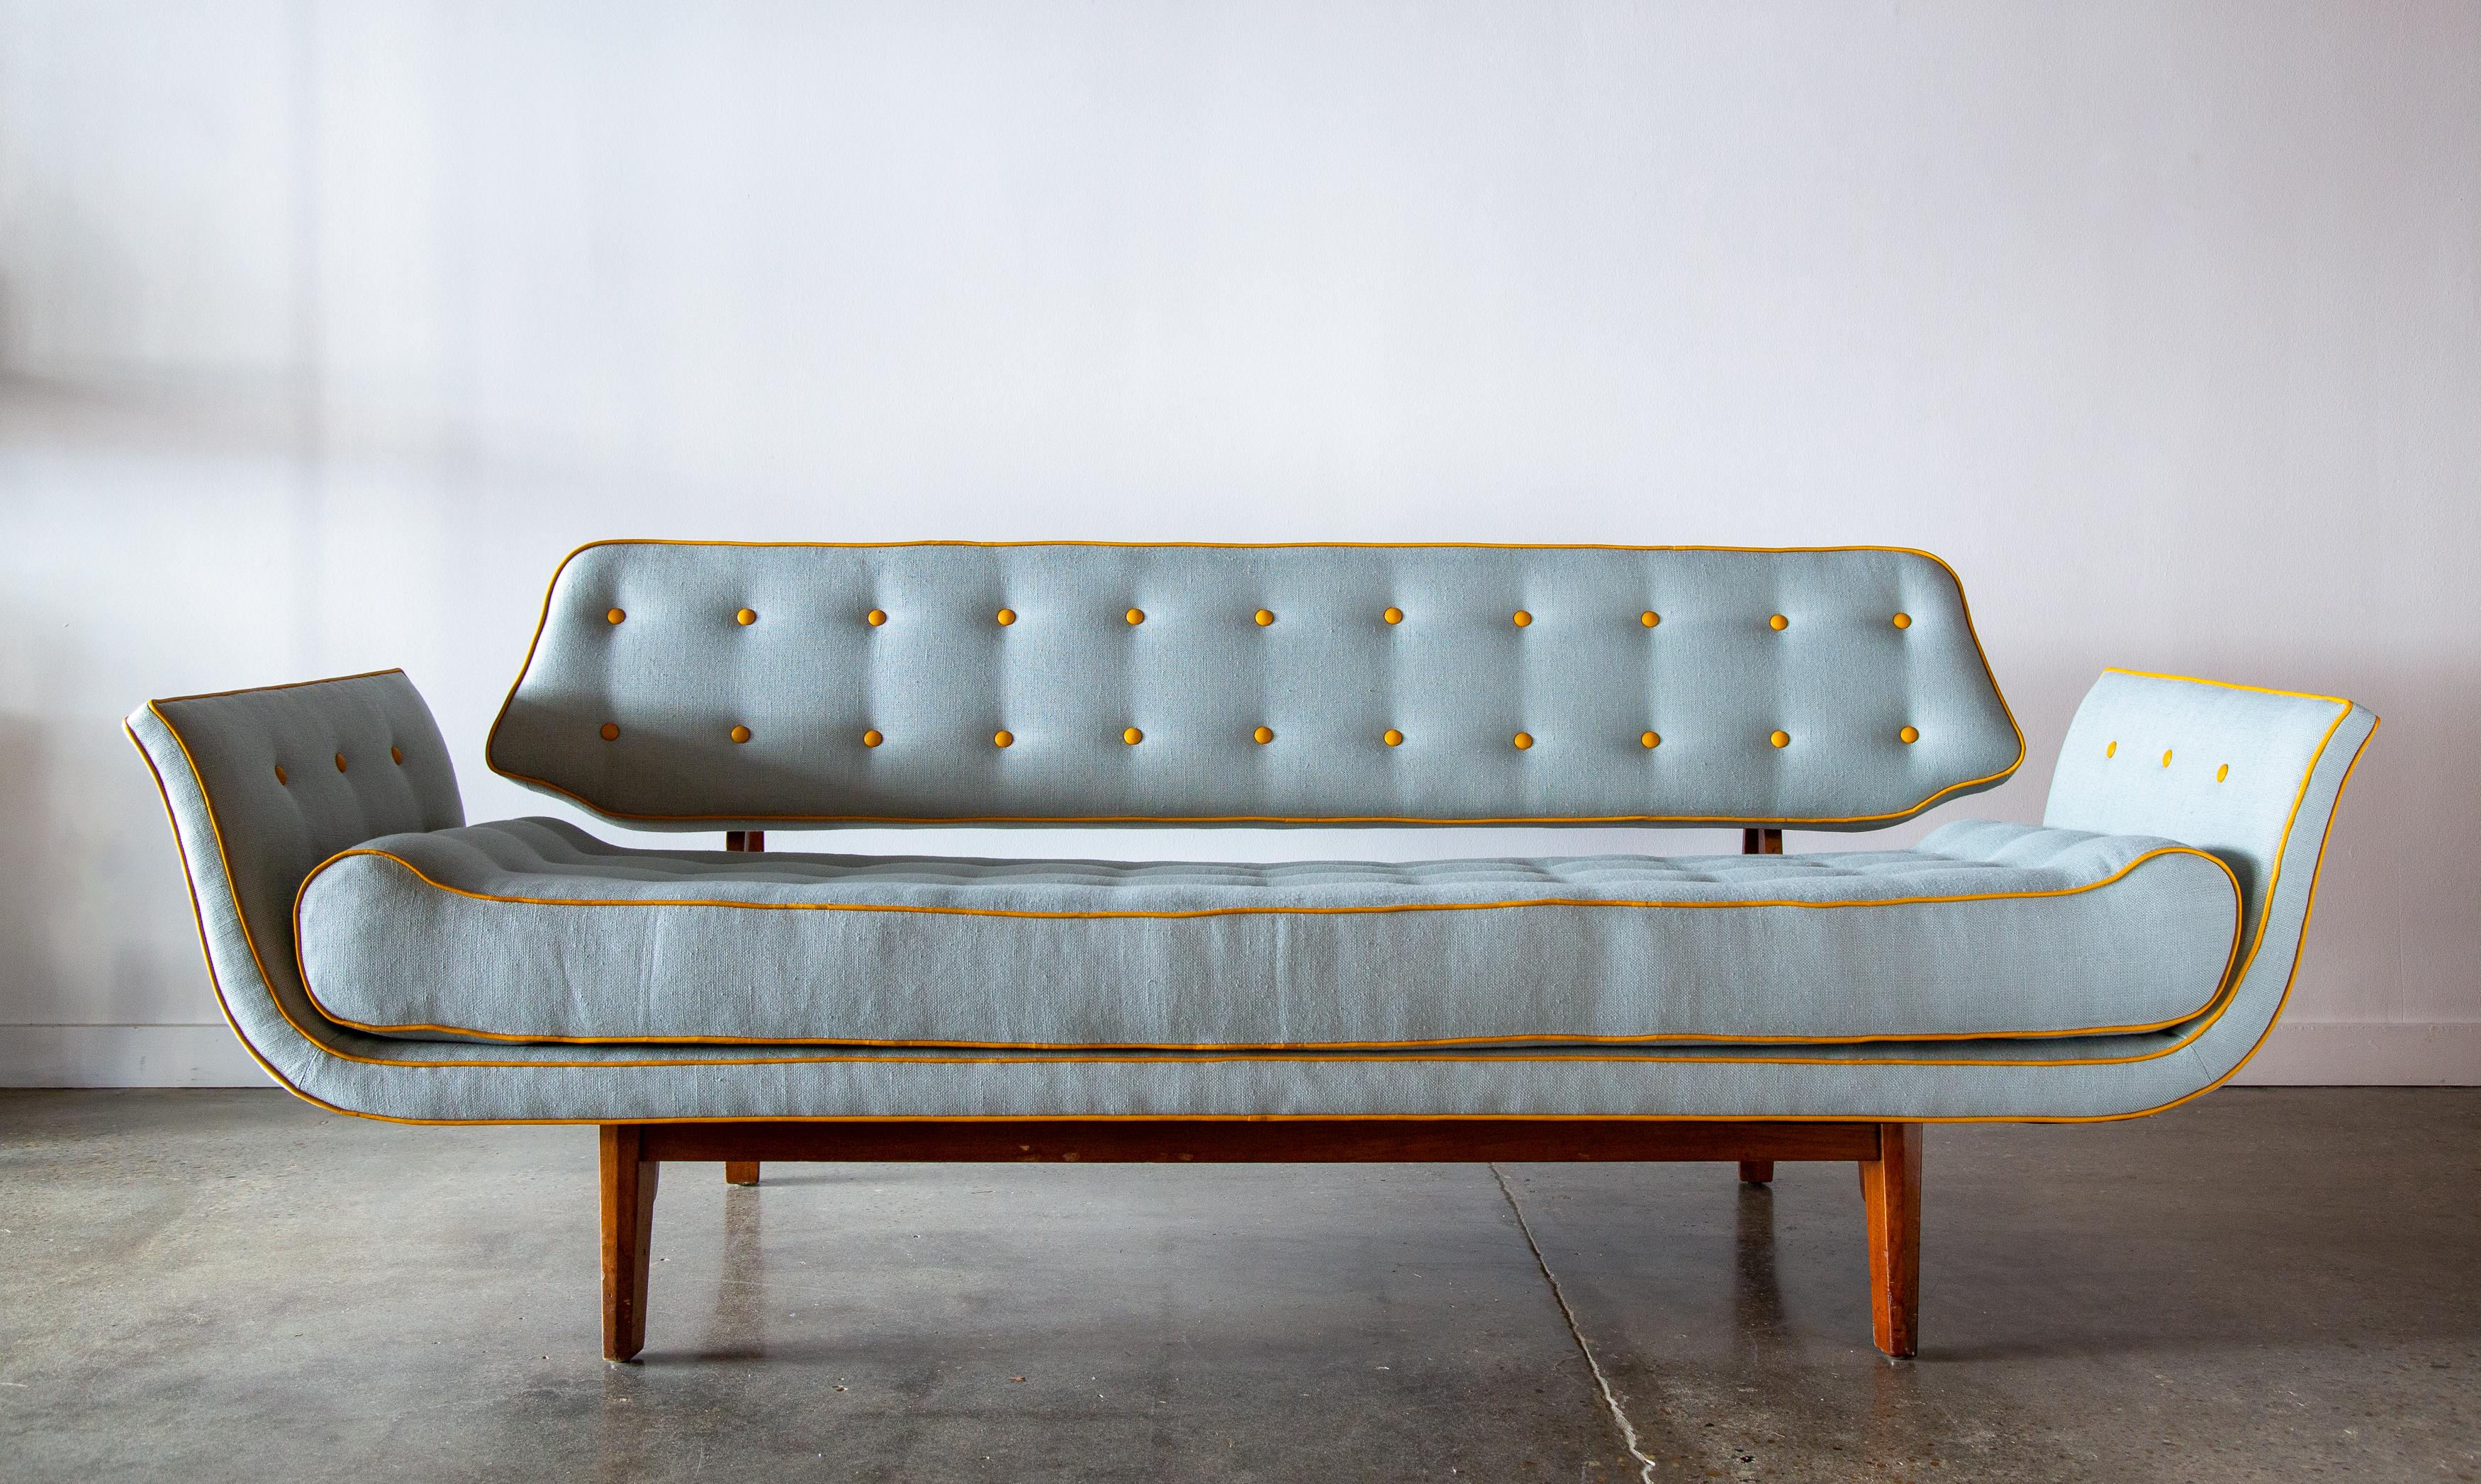 A 1950s La Gondola Sofa designed by Edward Wormley for Dunbar. This sofa with a solid mahogany bracket back, exaggerated curved arms, and floating open back is a true masterwork. The cushion with raised ends to mimic the shape of the back, is